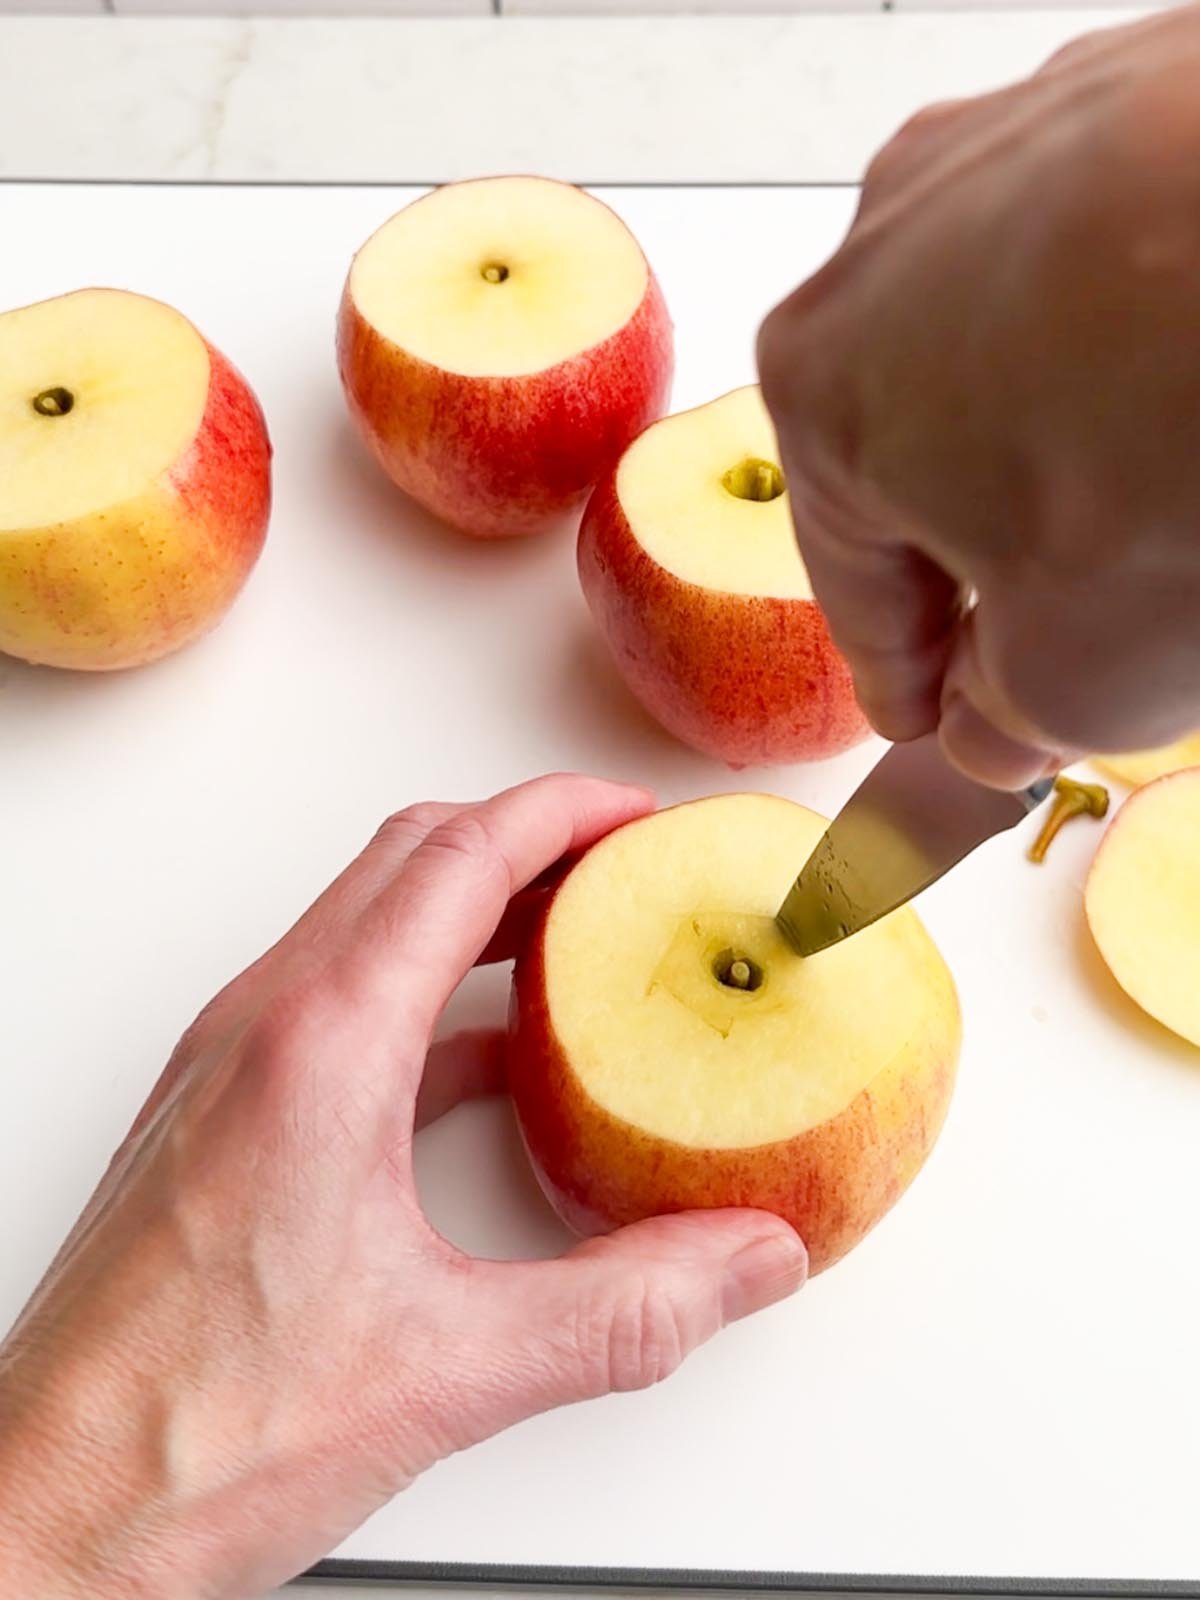 hands holding an apple and paring knife cutting out the core of an apple